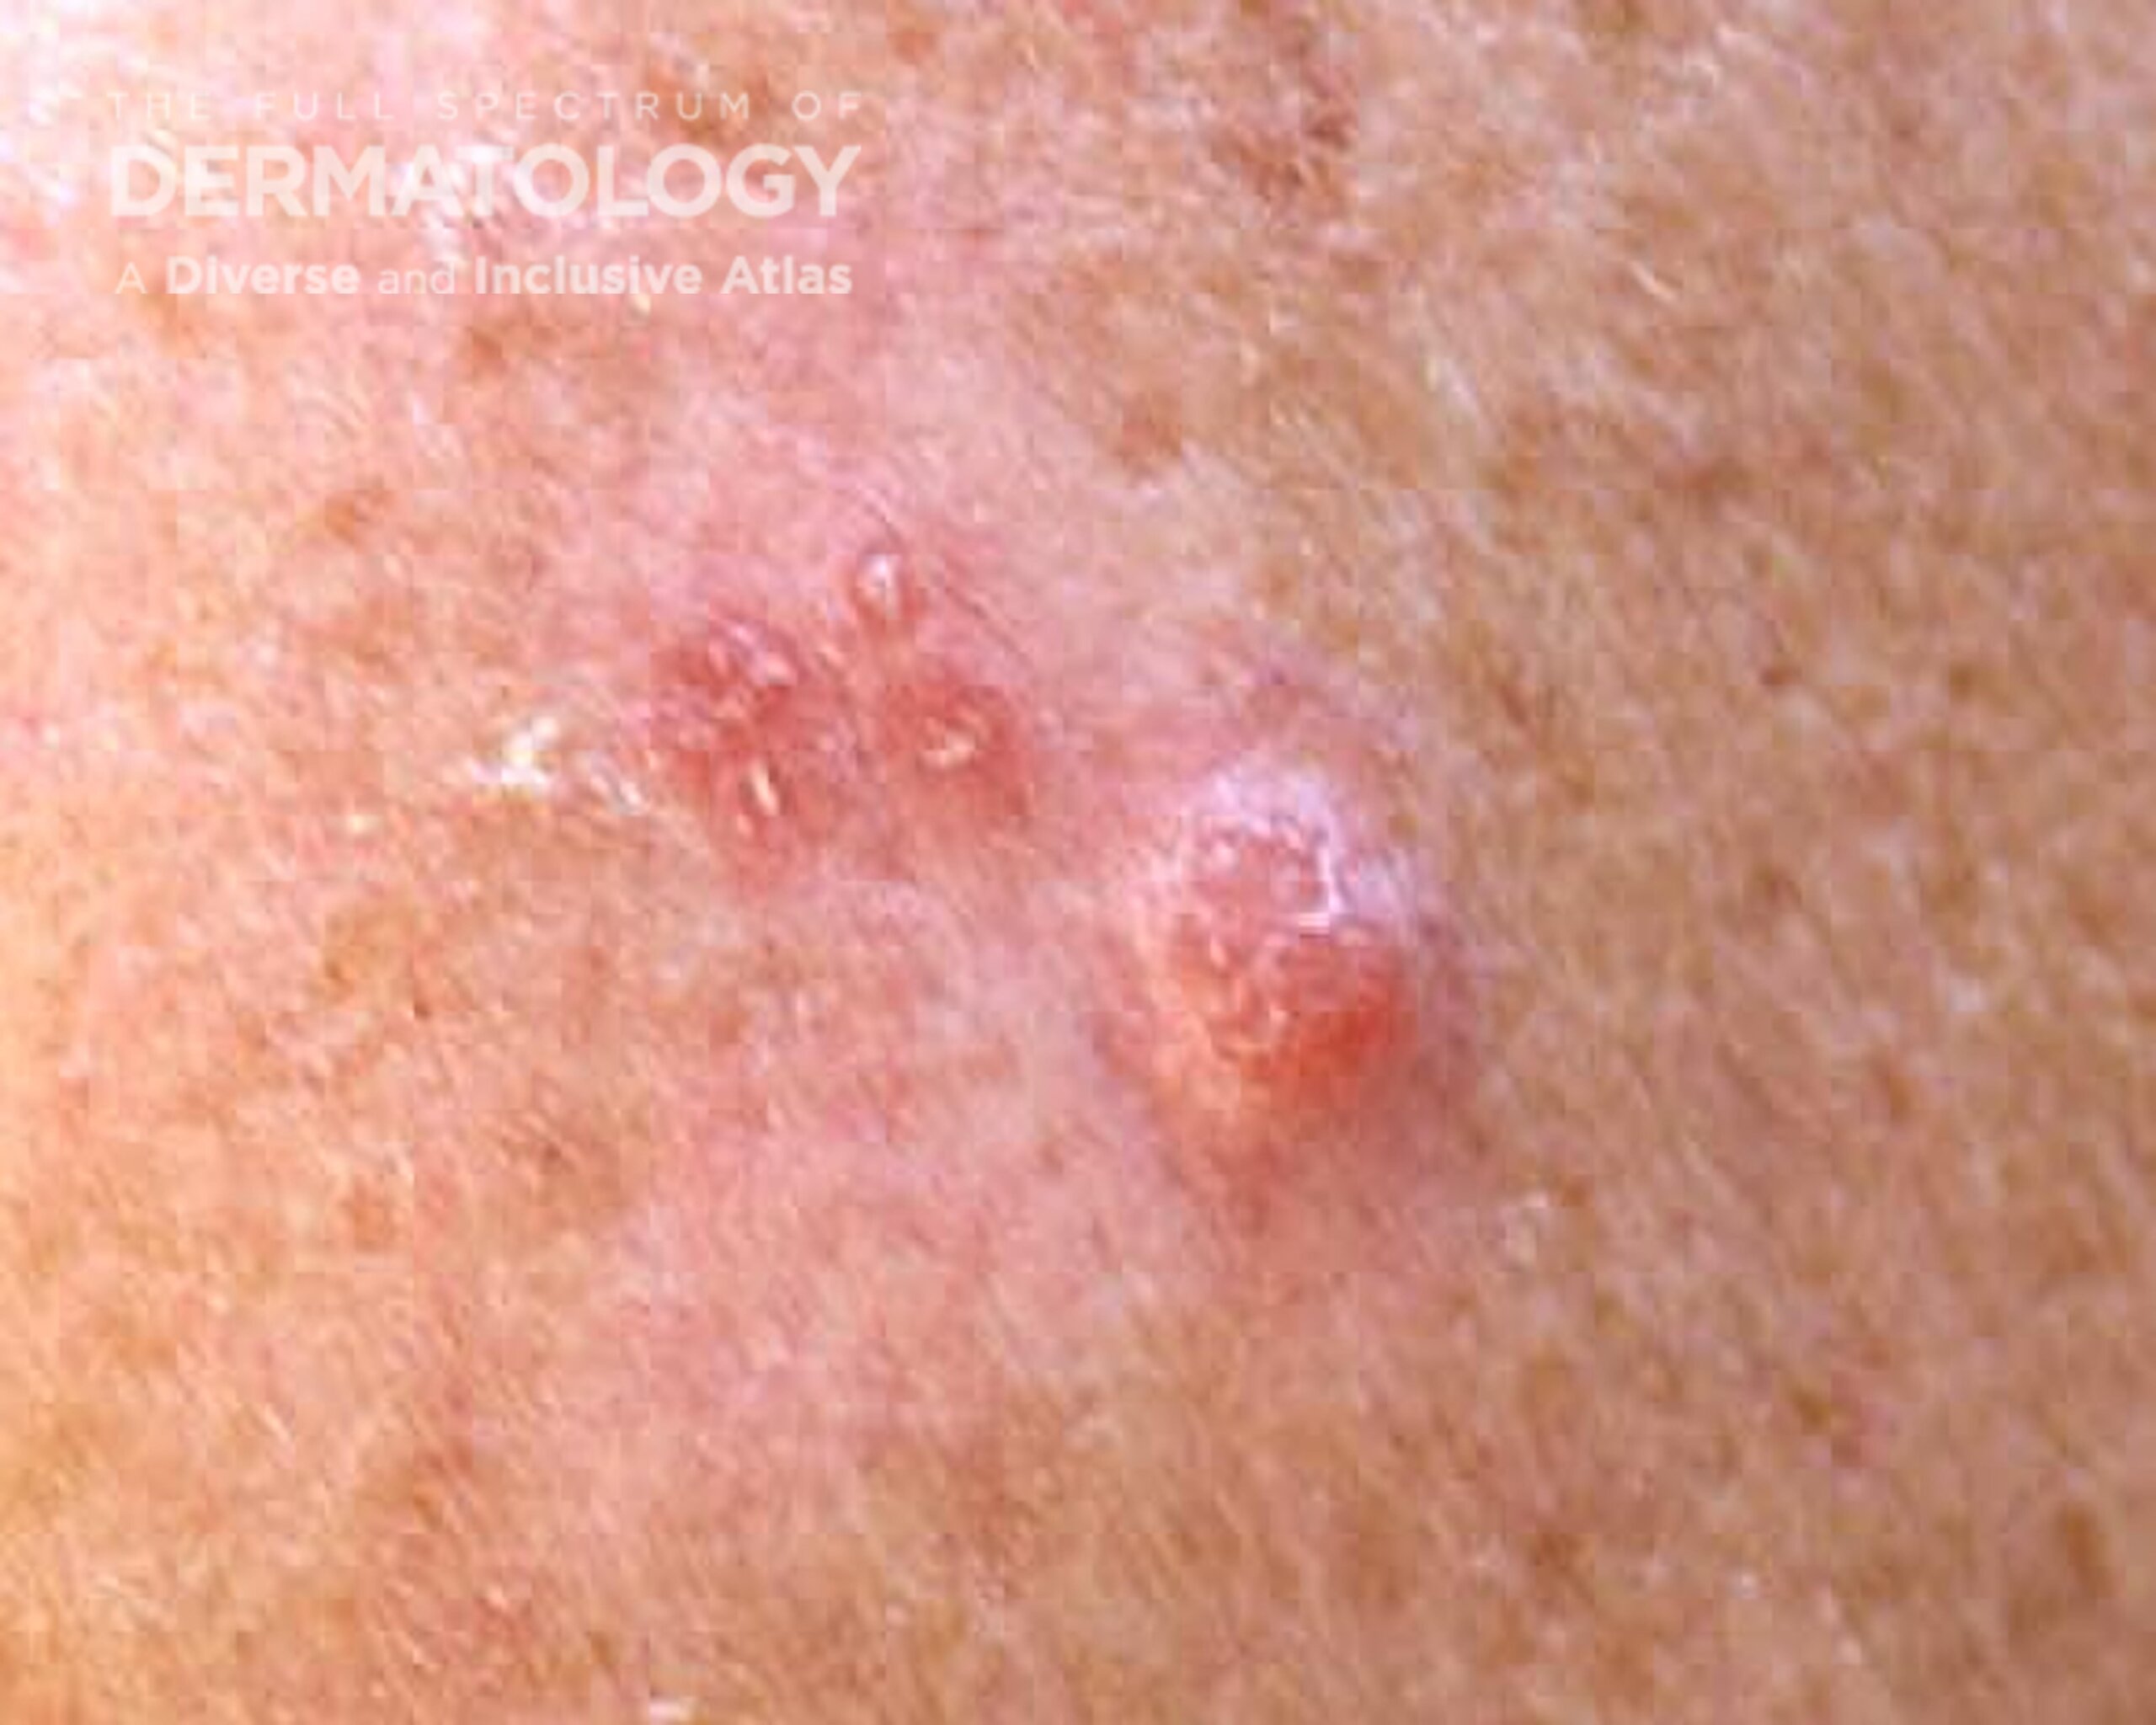 Deadly skin cancer can appear anywhere on the body, even where the sun doesn’t shine